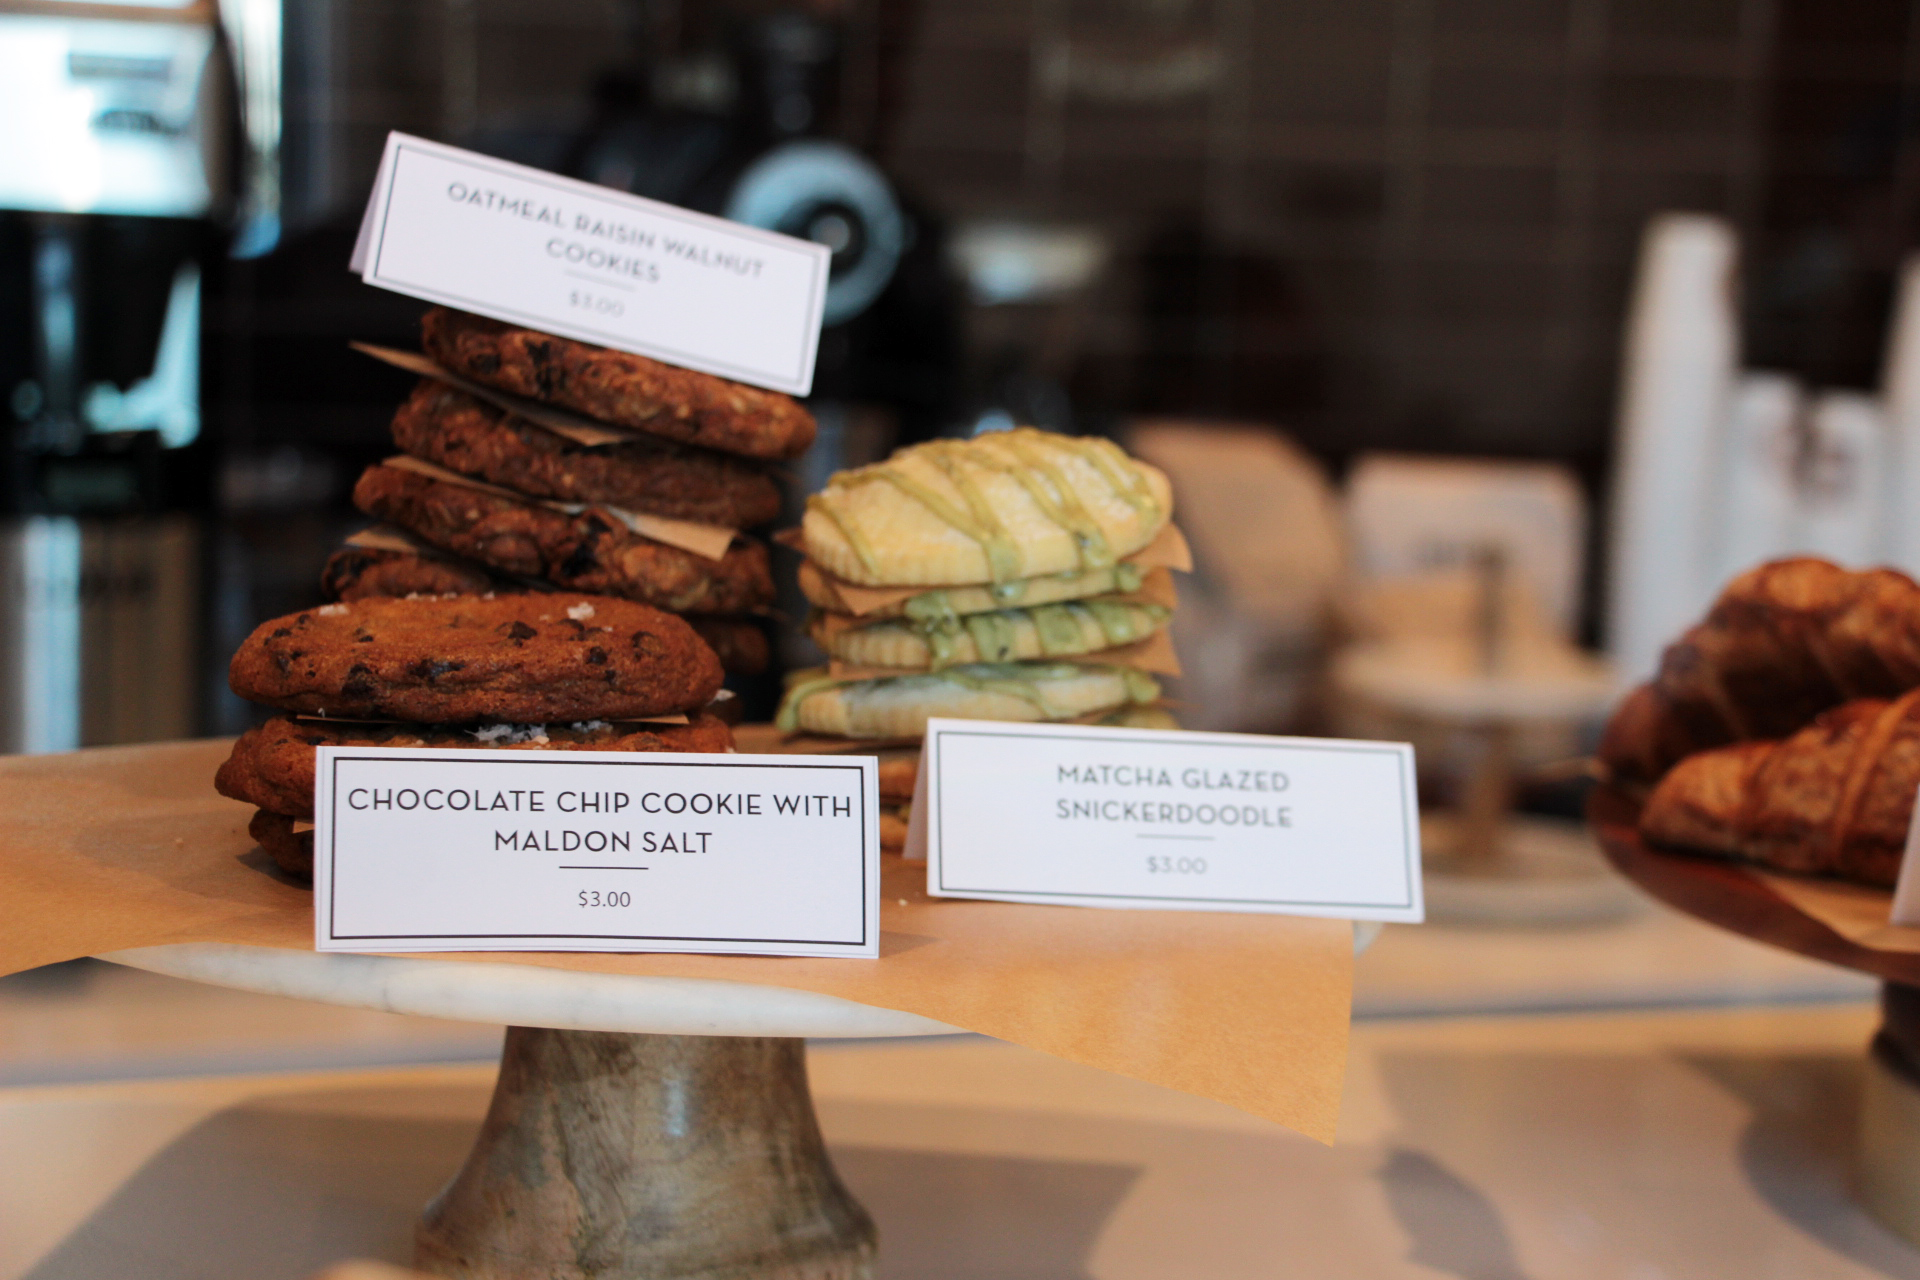 Housemade cookies include matcha-glazed snickerdoodles.